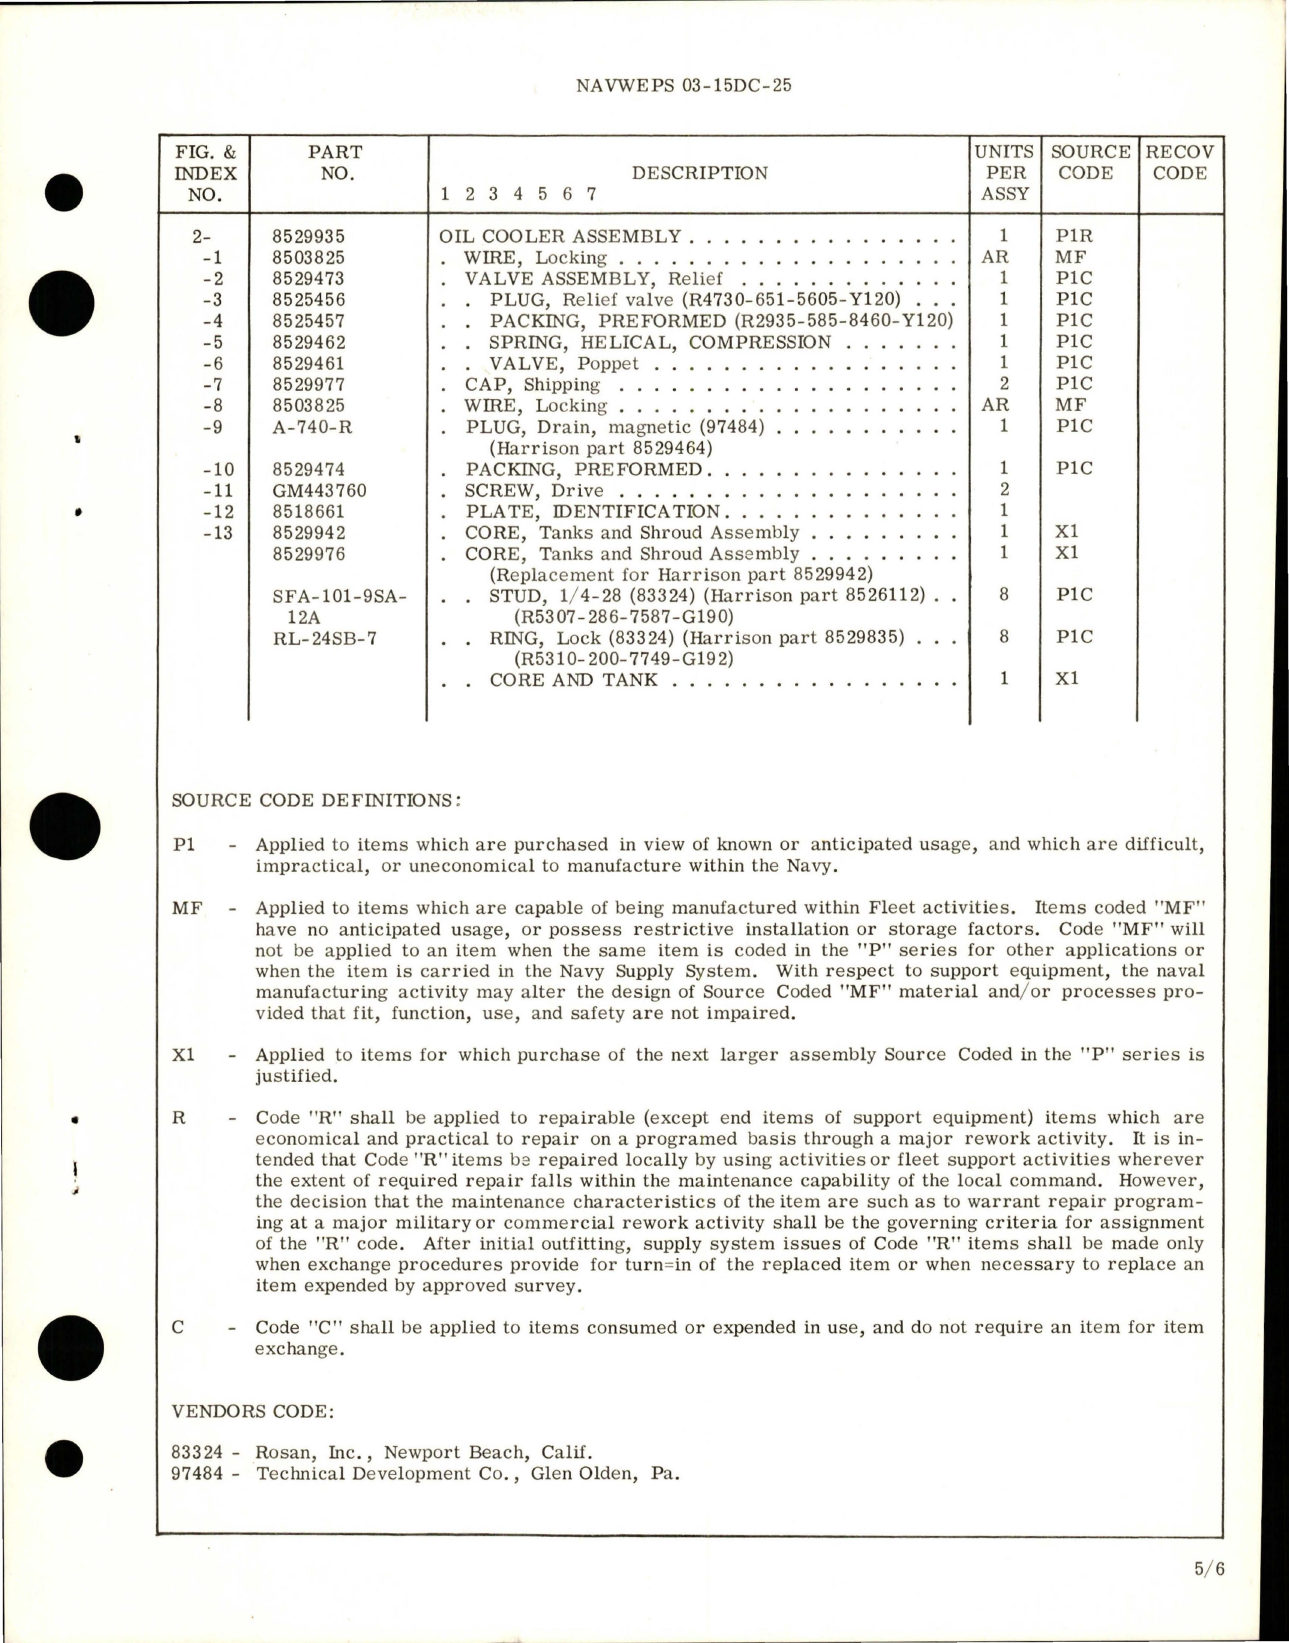 Sample page 5 from AirCorps Library document: Overhaul Instructions with Parts for Oil Cooler Assembly - Model AP21AN16-02 - Part 8529935